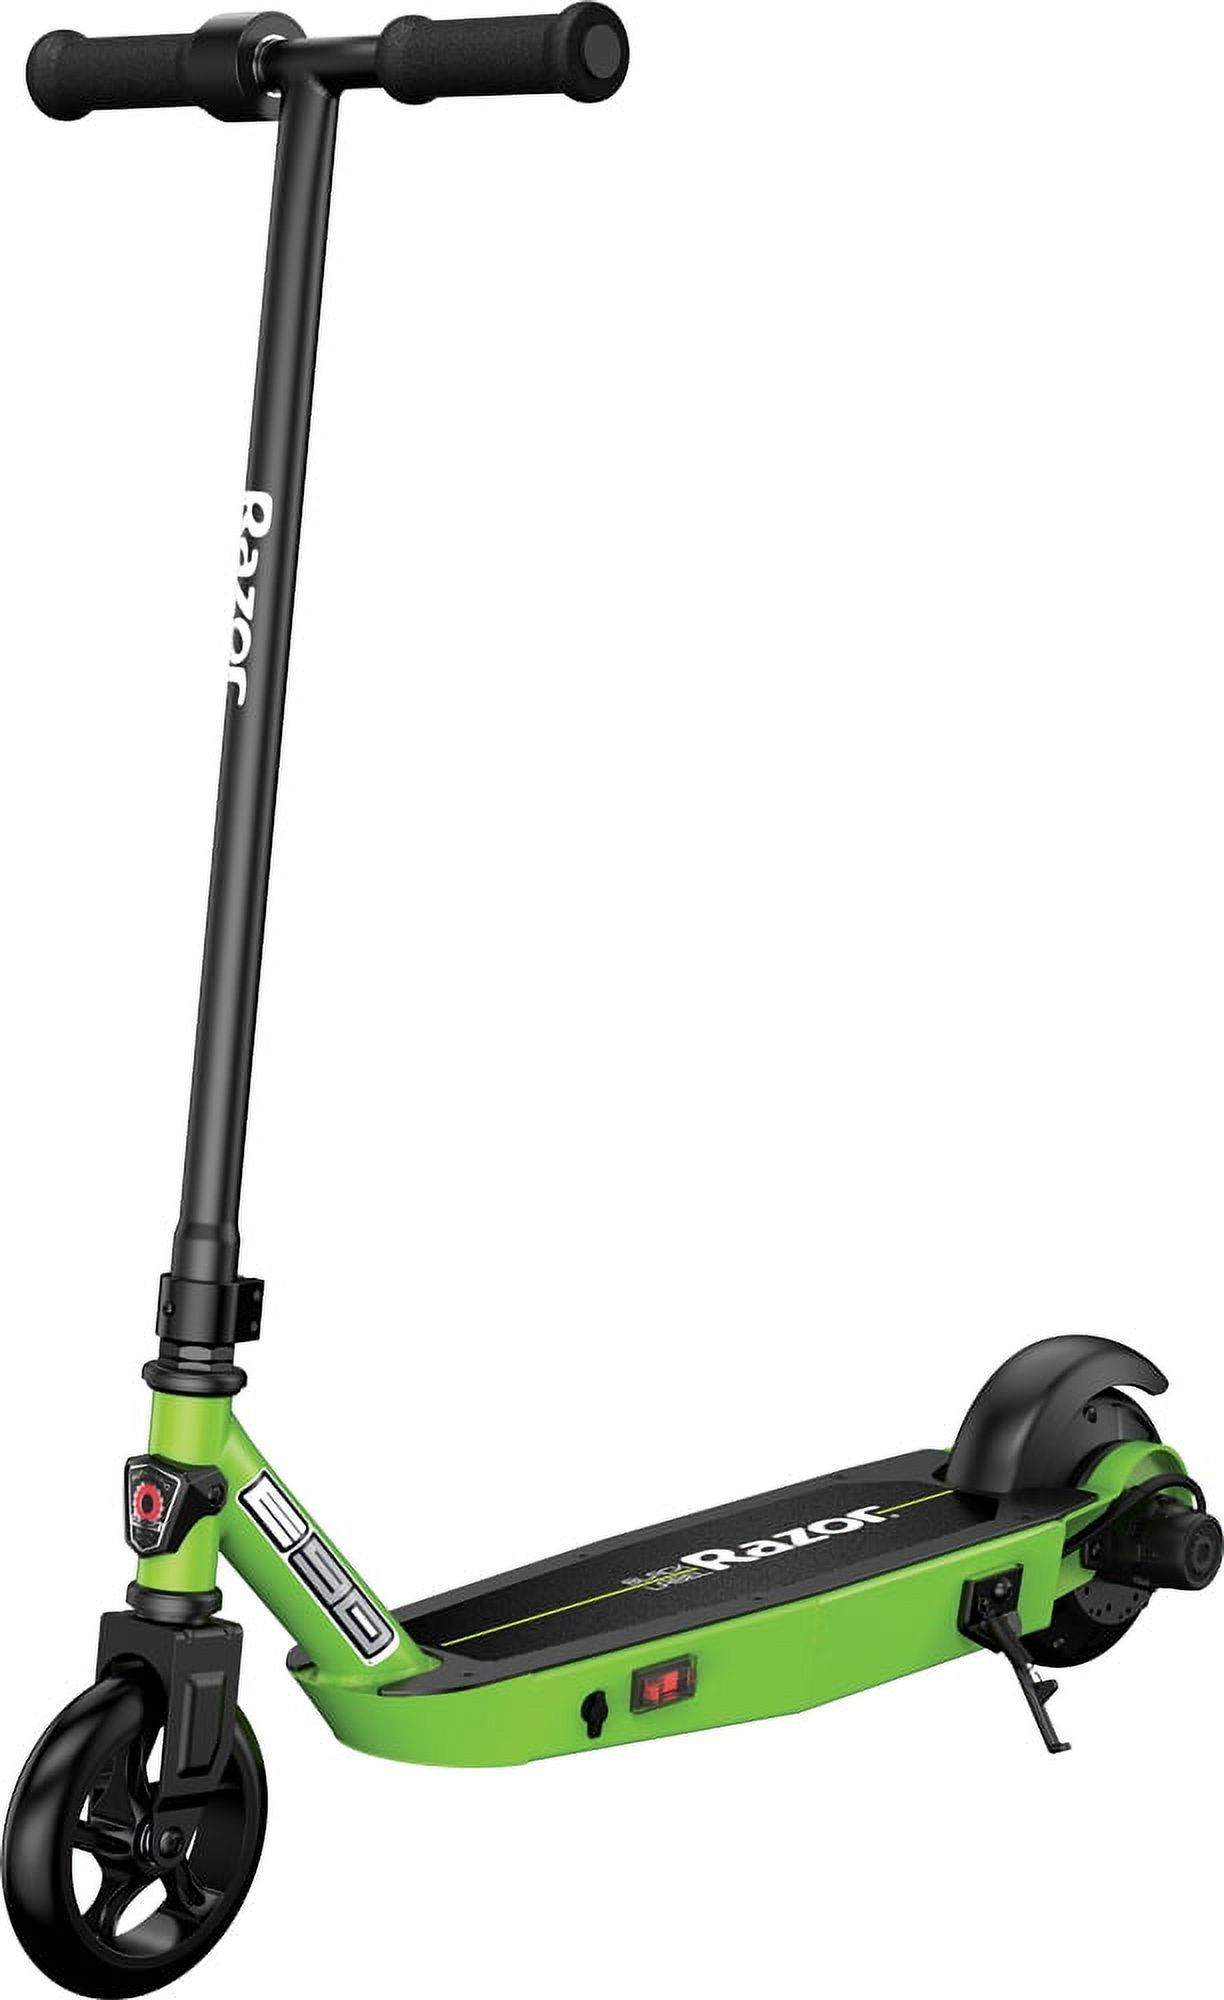 Razor Black Label E90 Electric Scooter - Green, for Kids Ages 8+ and up to 120 lbs, up to 10 mph - image 1 of 9